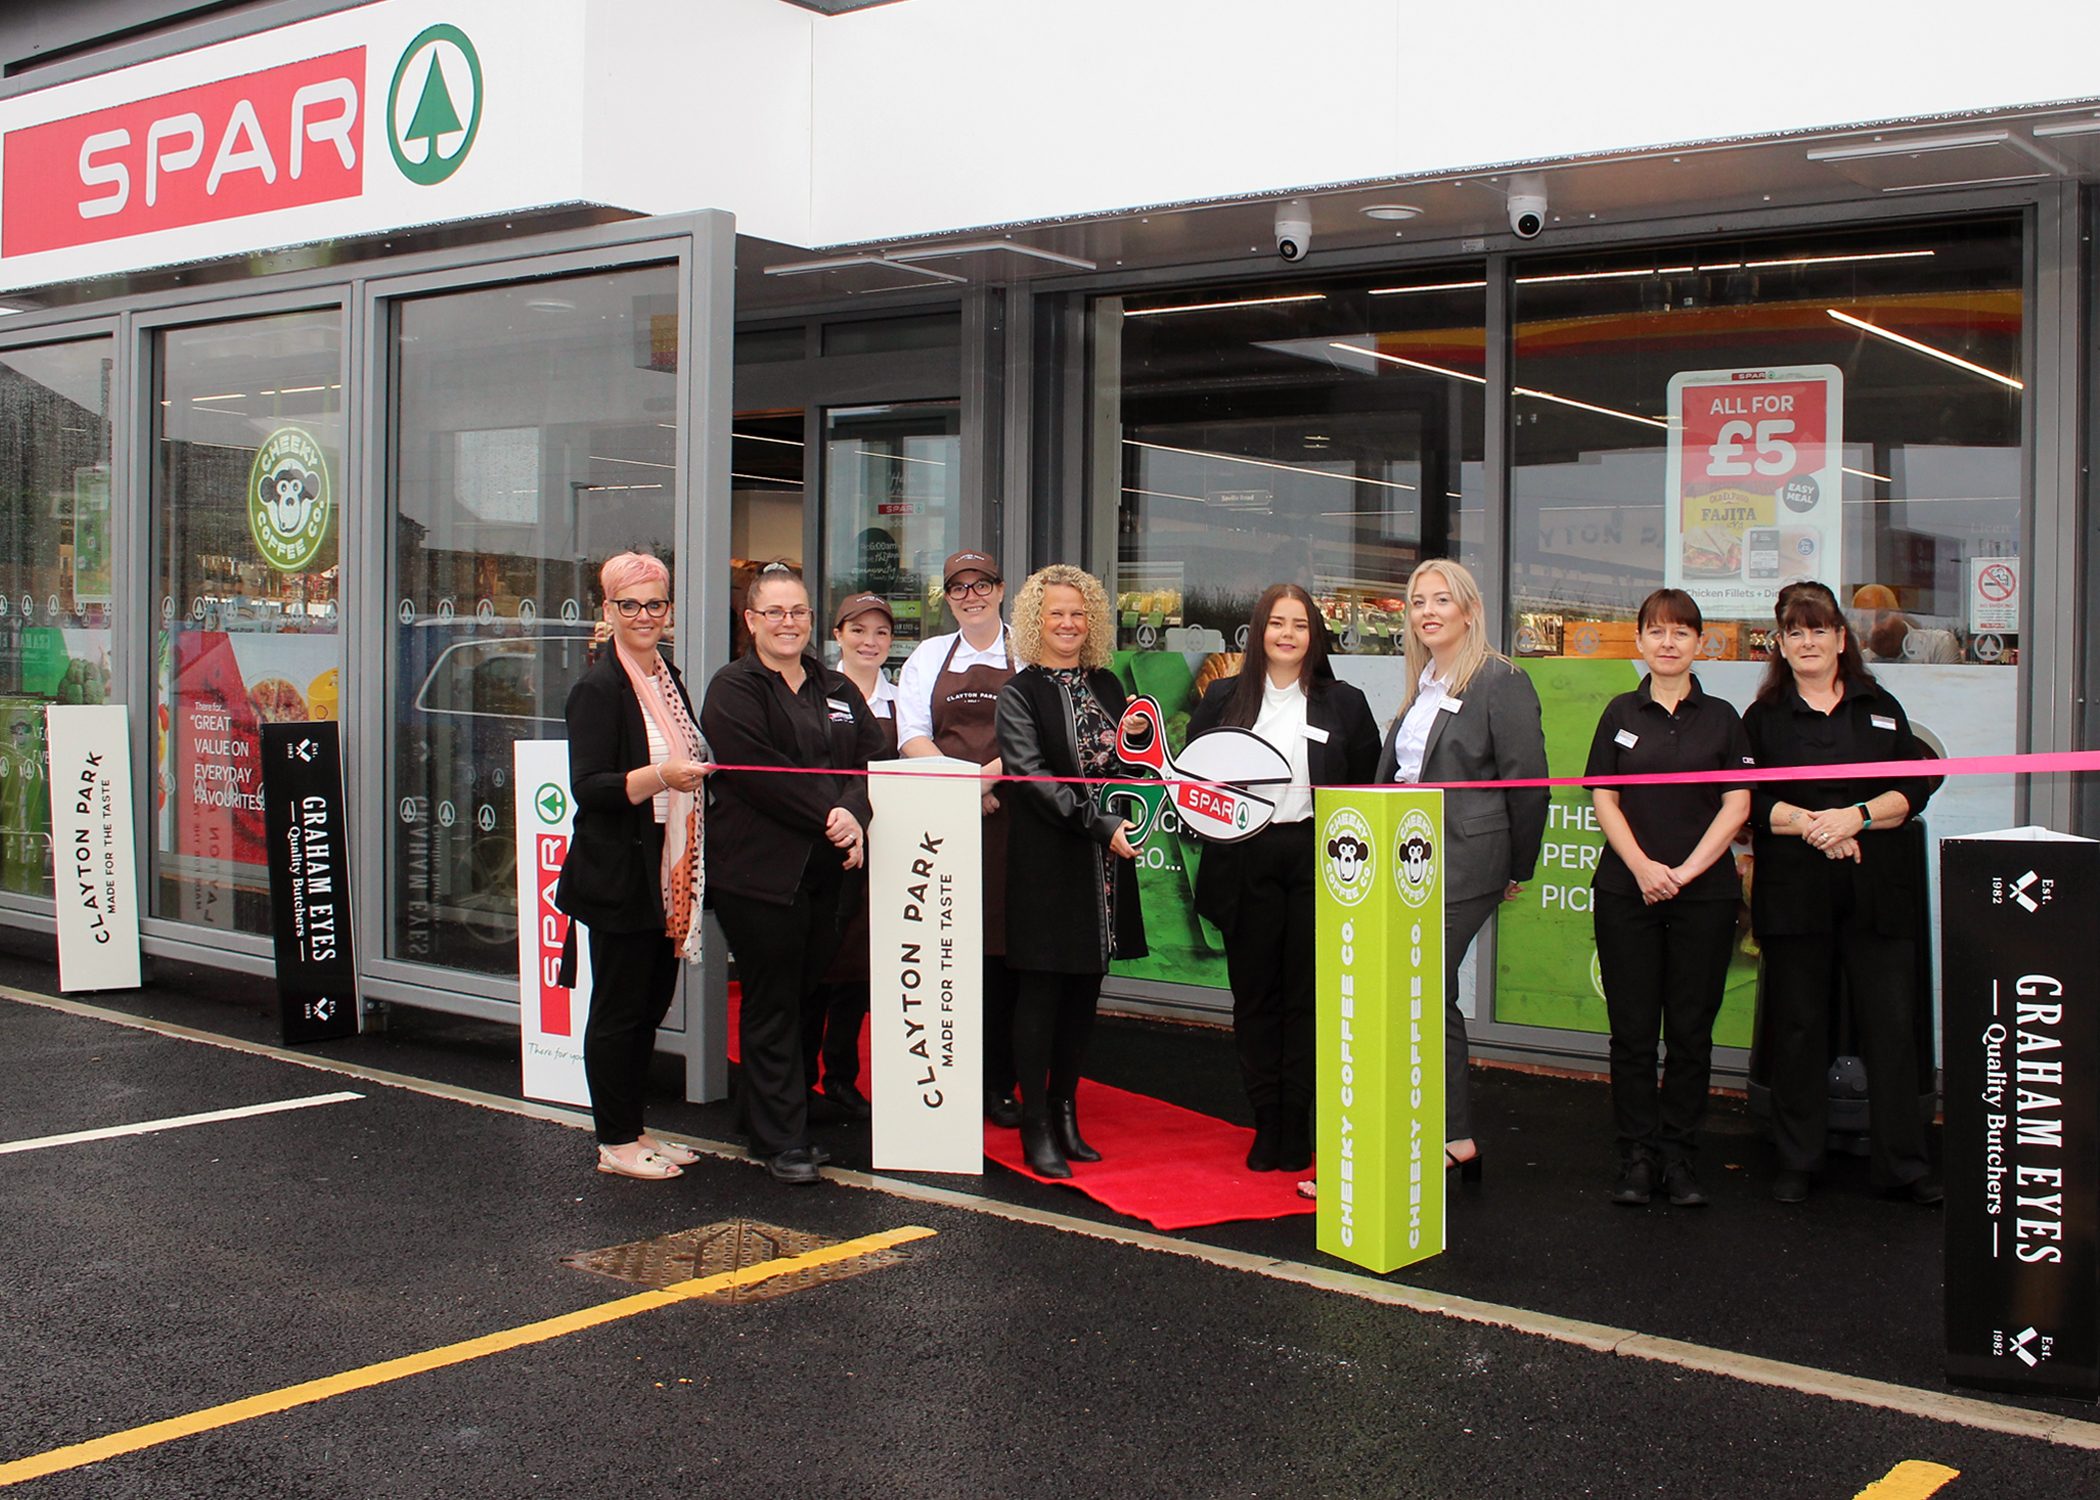 New SPAR store and Shell service station now open in Radcliffe